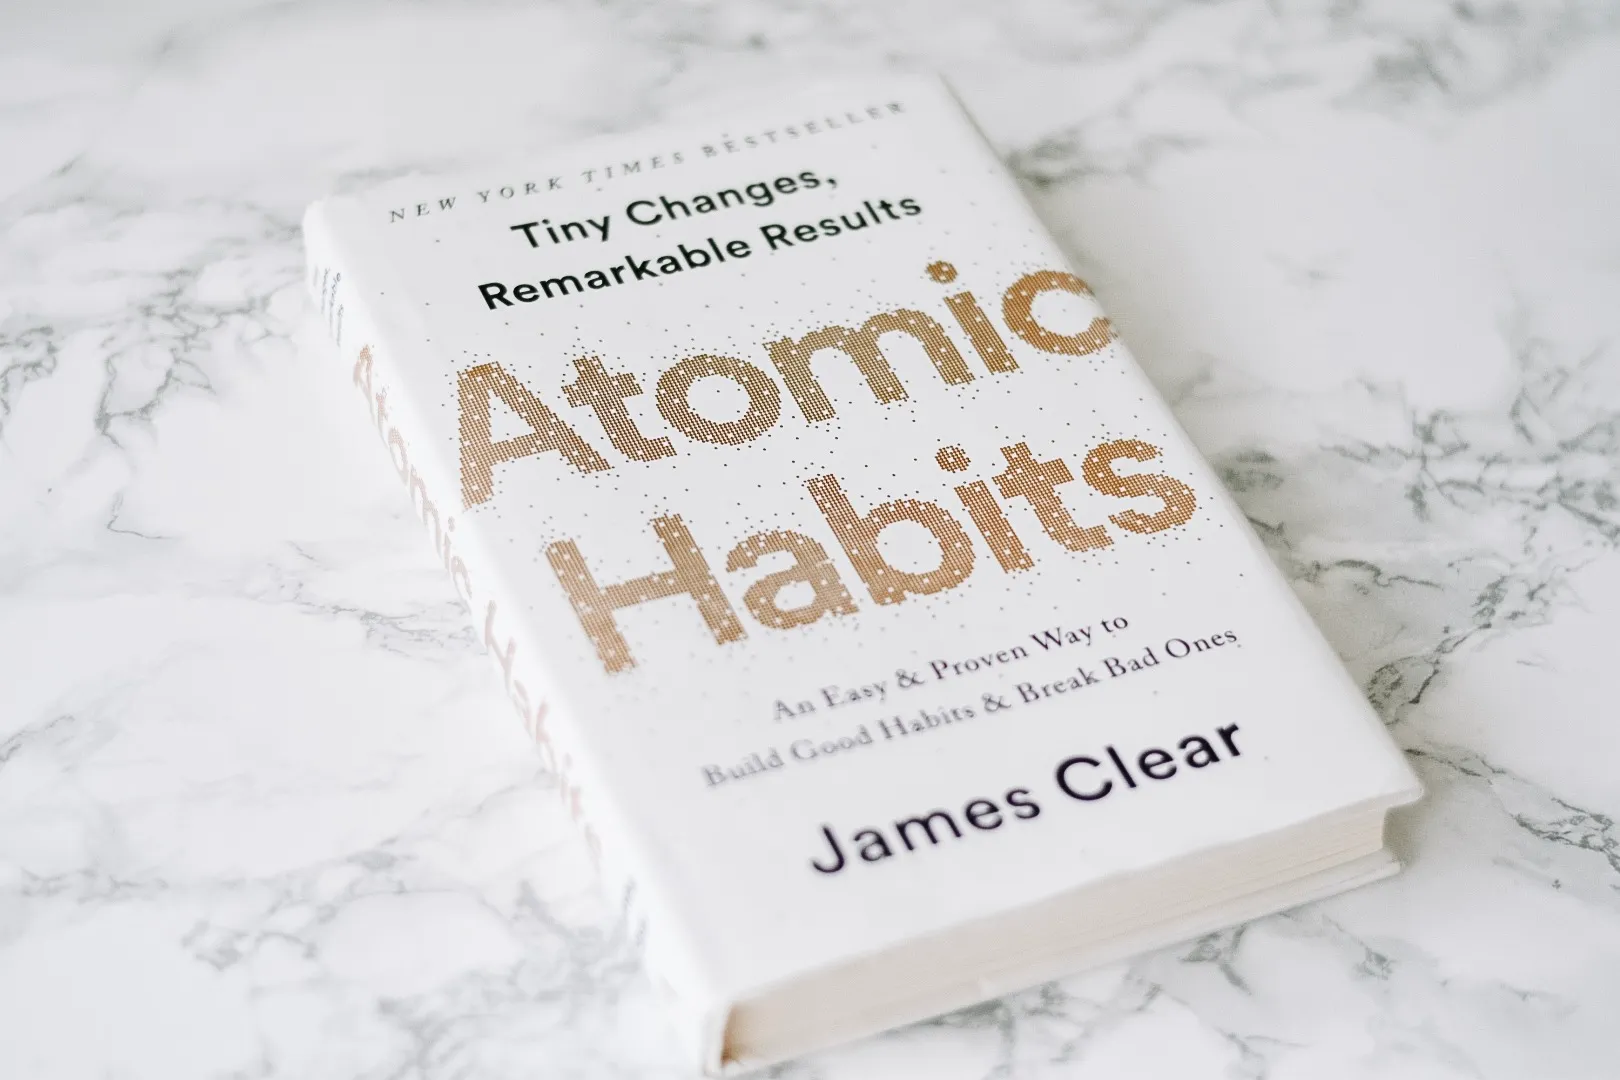 Atomic-habits-book-by-james-clear